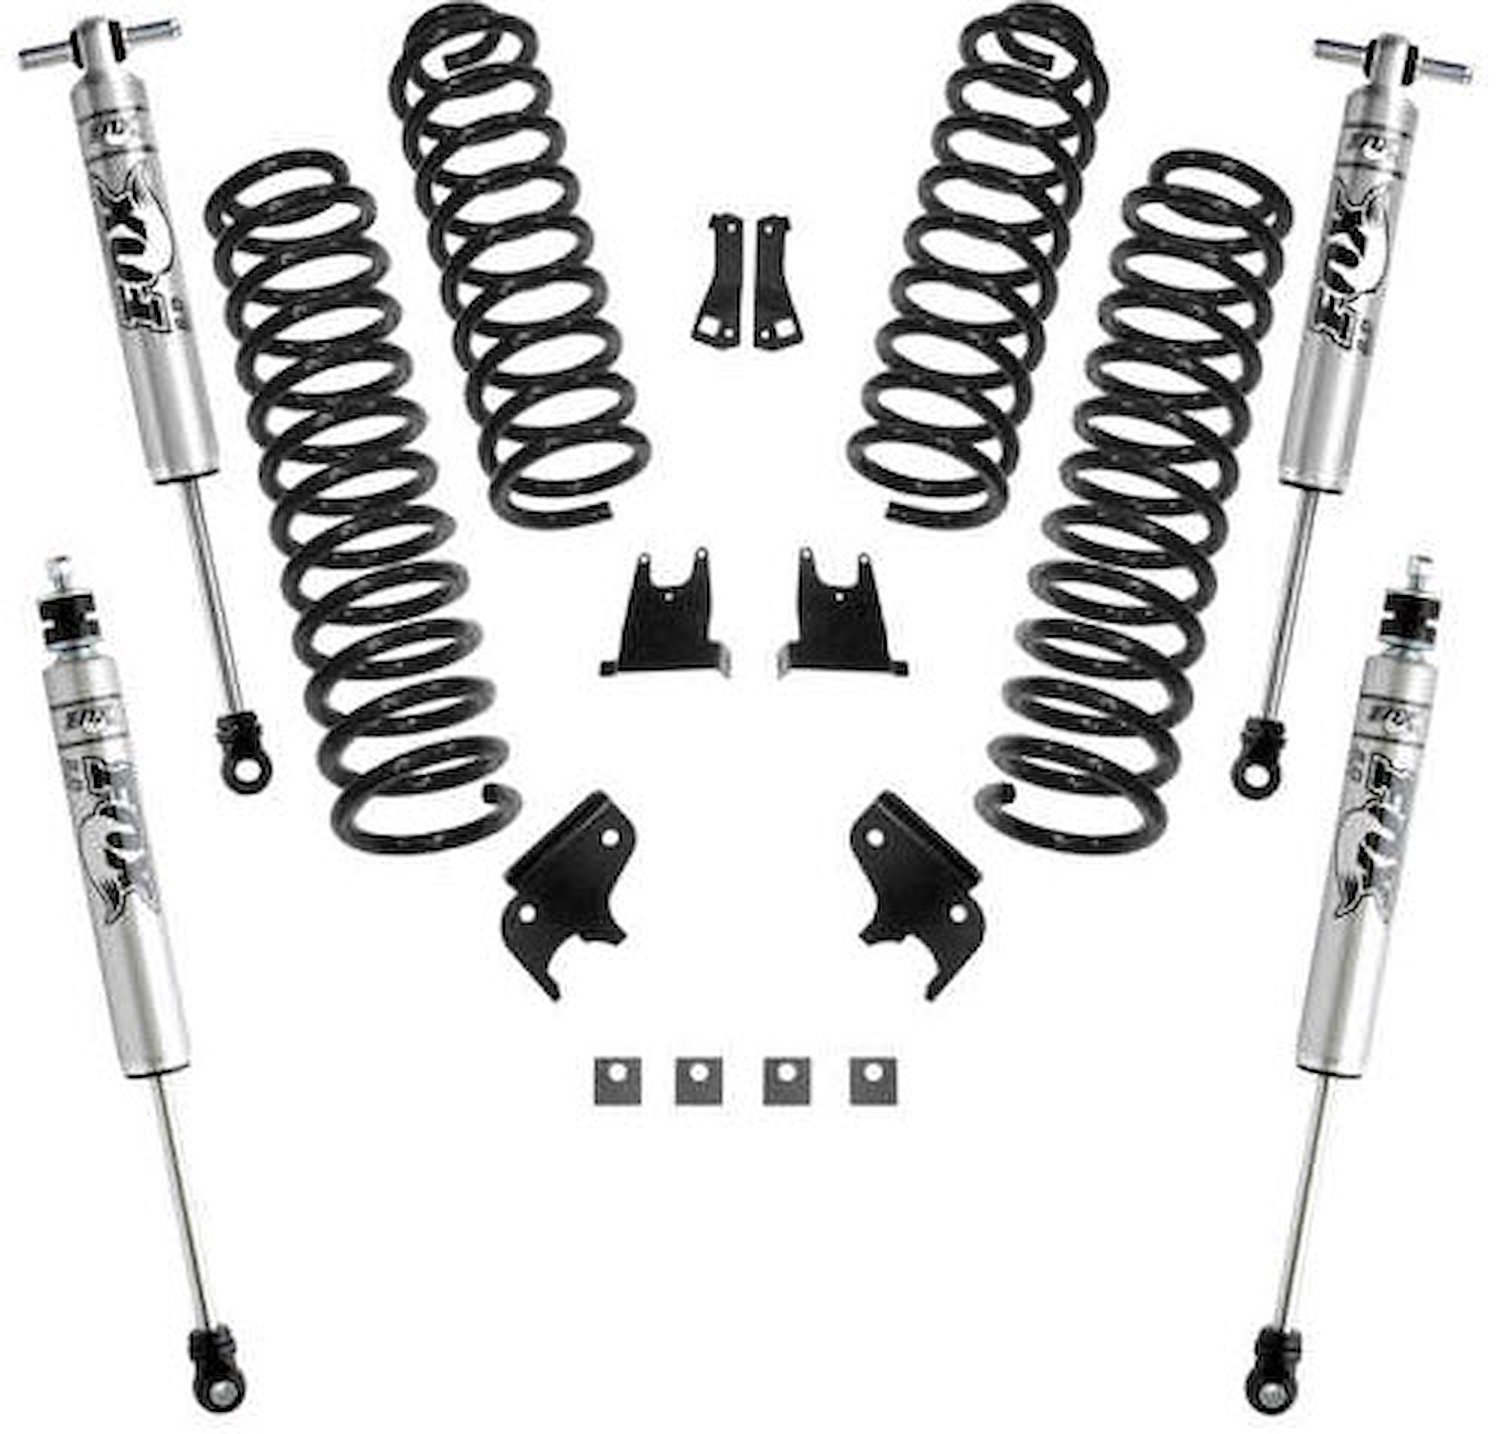 K931F Front and Rear Suspension Lift Kit, Lift Amount: 2.5 in. Front/2.5 in. Rear